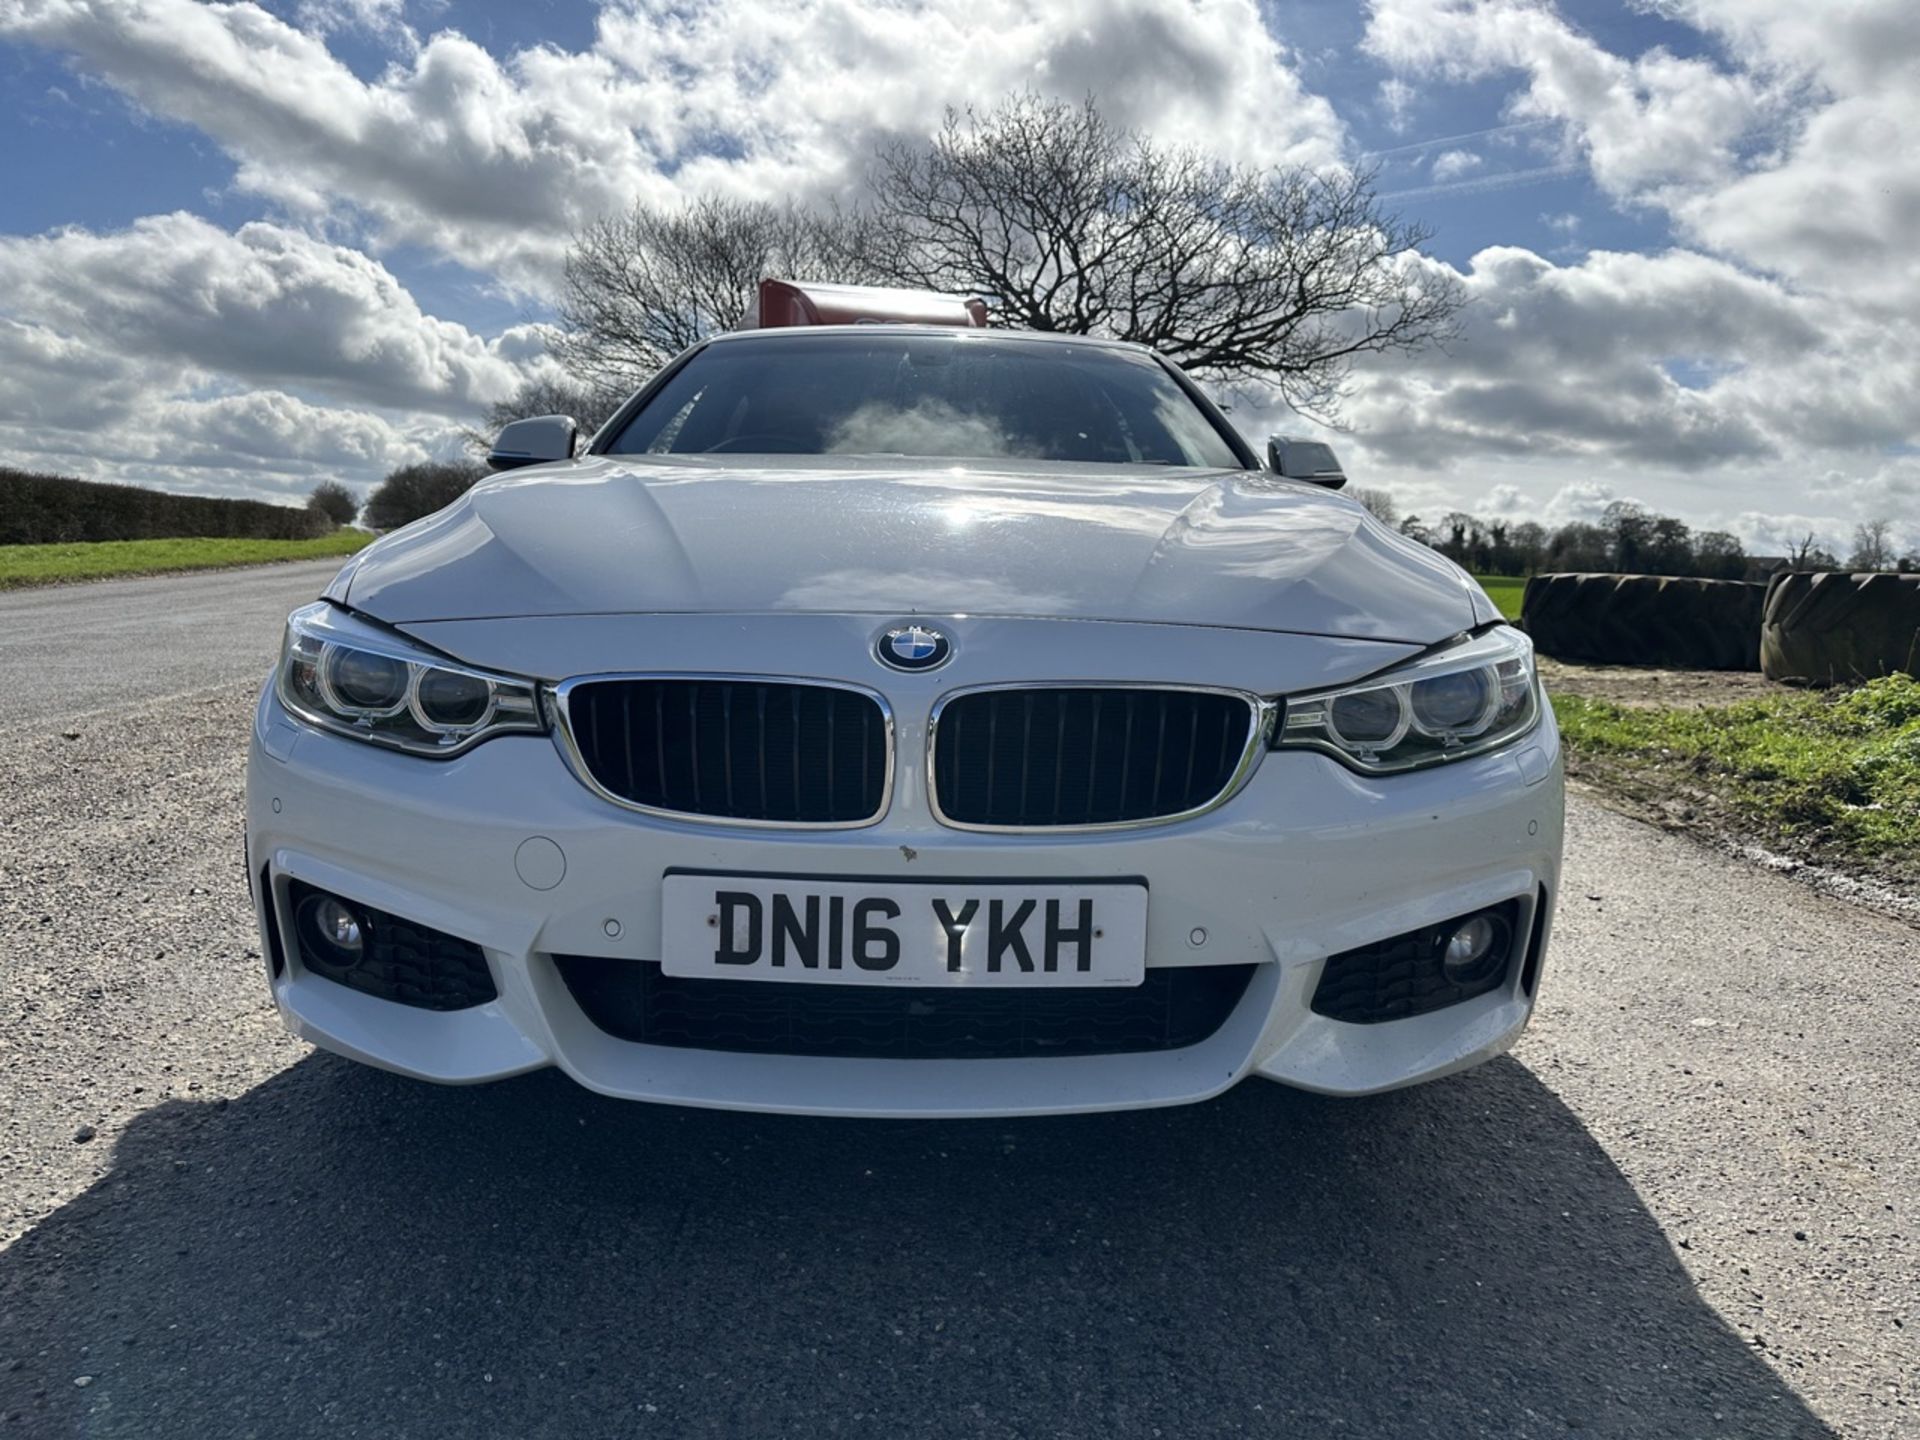 BMW 4 SERIES 420i M Sport 5dr [Professional Media] Manual - Petrol - 2.0 - Coupe- 54k miles - 2016 - Image 7 of 13